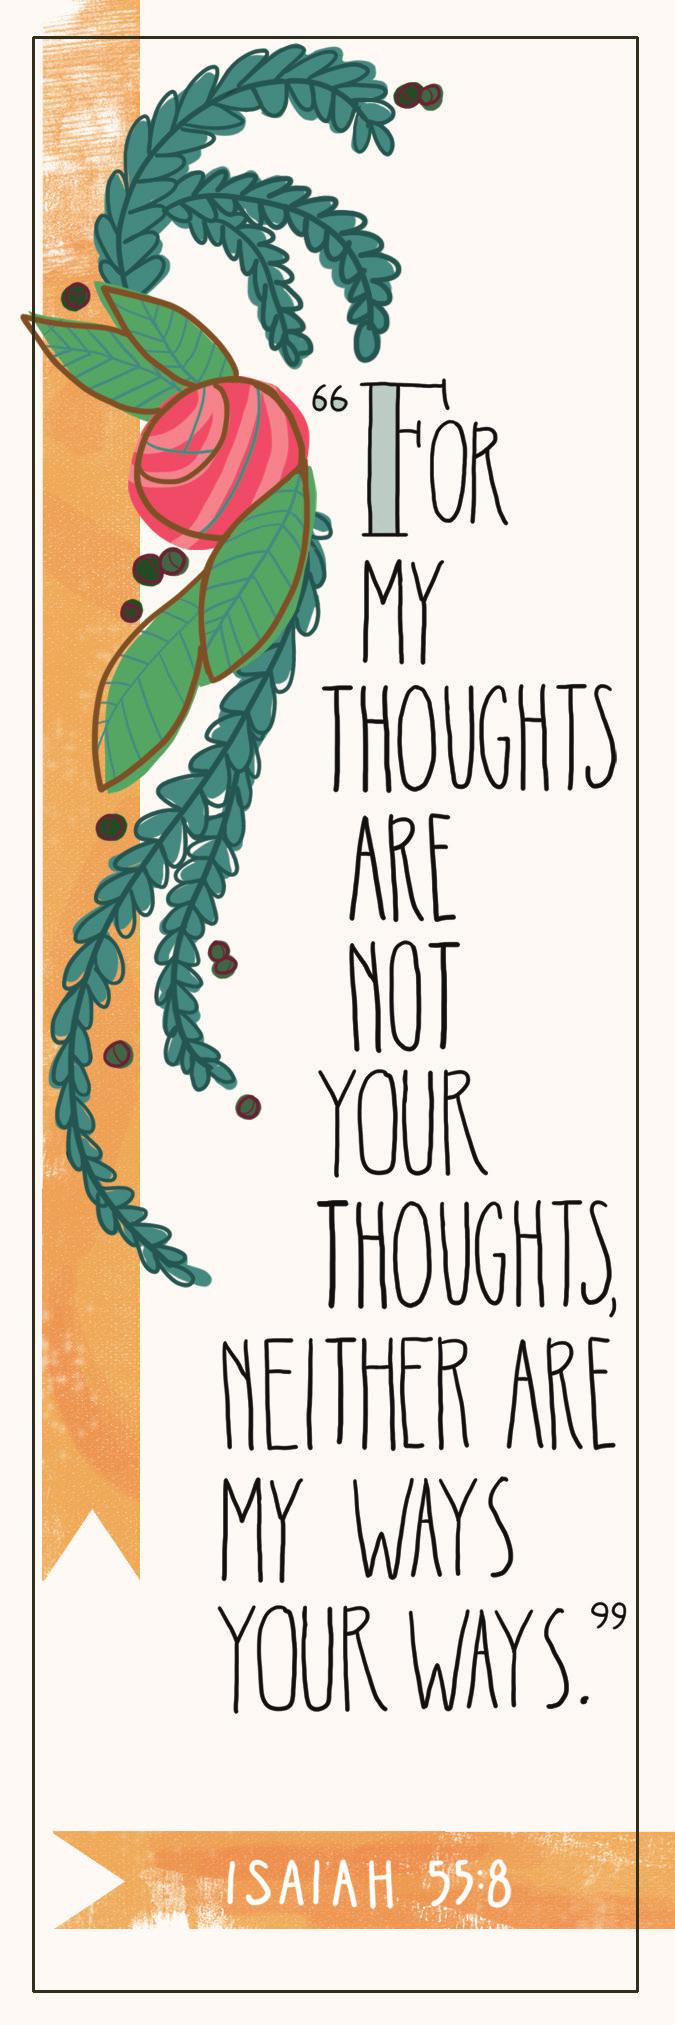 I January 9 For my thoughts are not your thoughts, neither are your ways my ways, declares the Lord. ISAIAH 55:8 magine a tiny point and let it represent your mind.